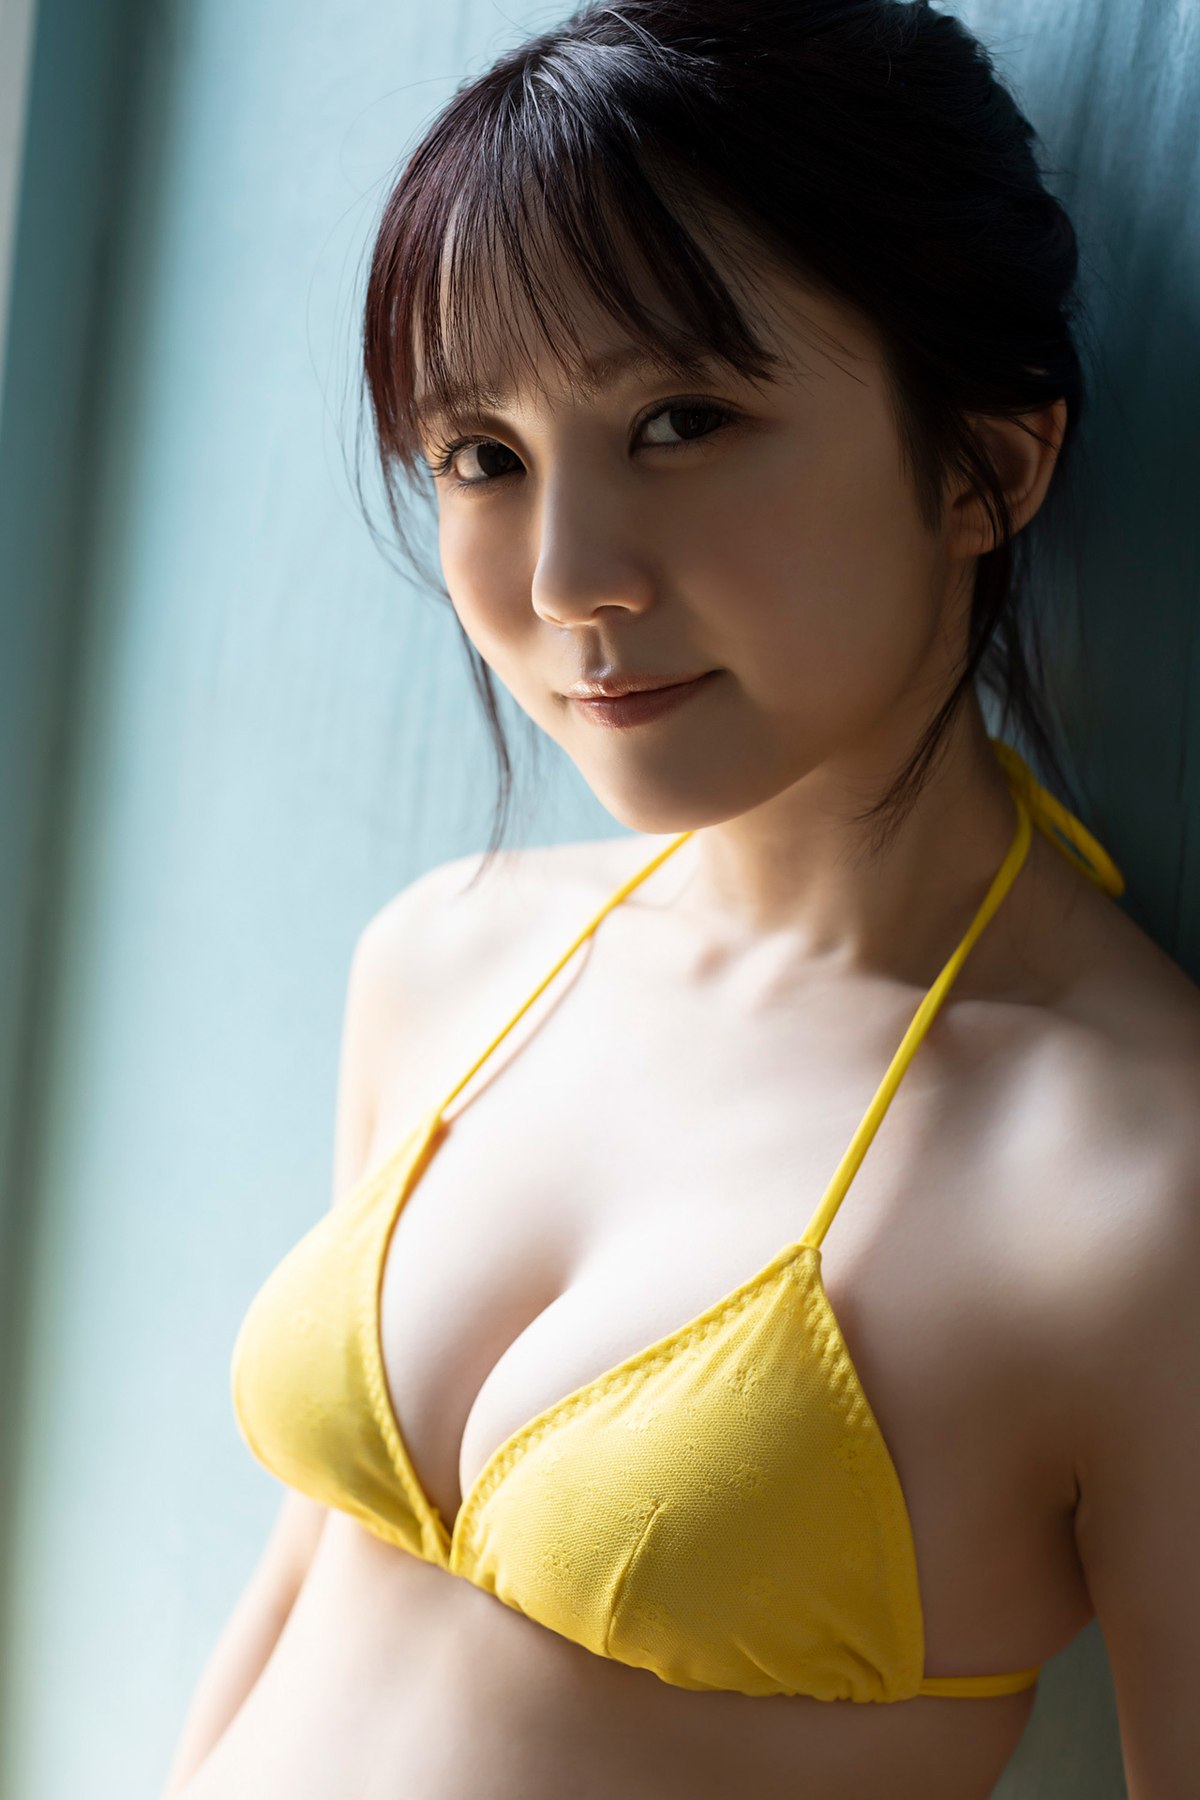 FLASH Photobook 2023 06 20 Tsumugi Hashimoto 橋本つむぎ The Best In Osaka Is The Best In Japan 0073 7337404665.jpg